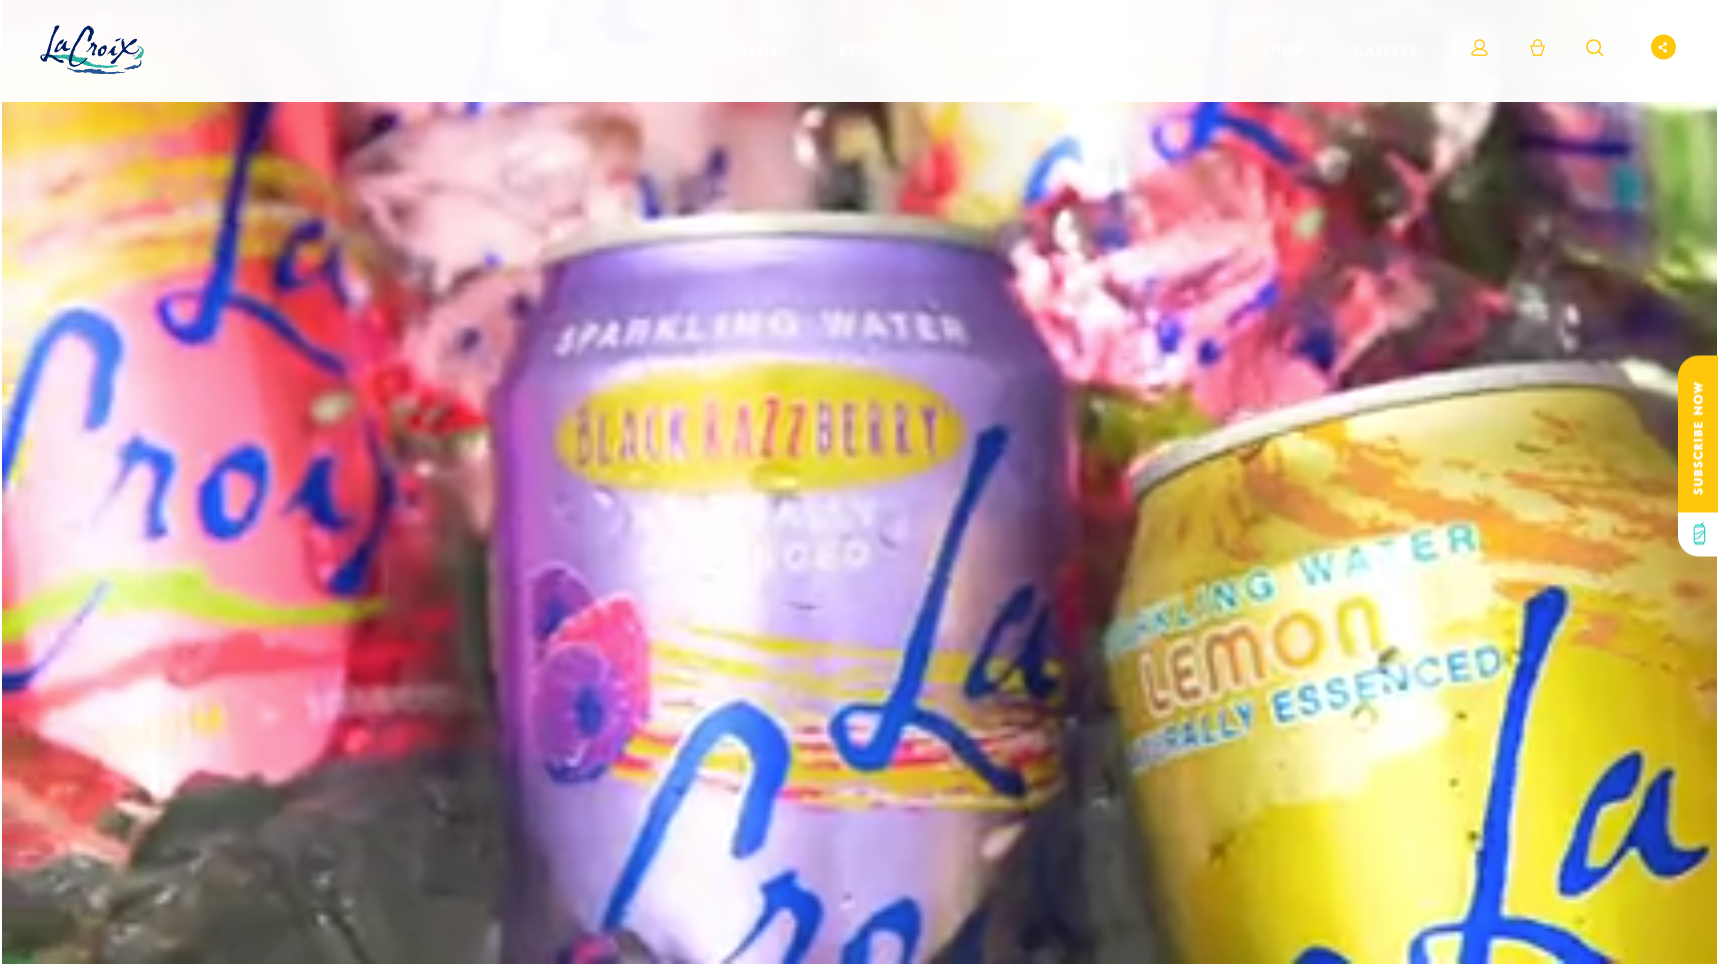 LaCroix Sparkling Water - Flavored Water Manufacturer